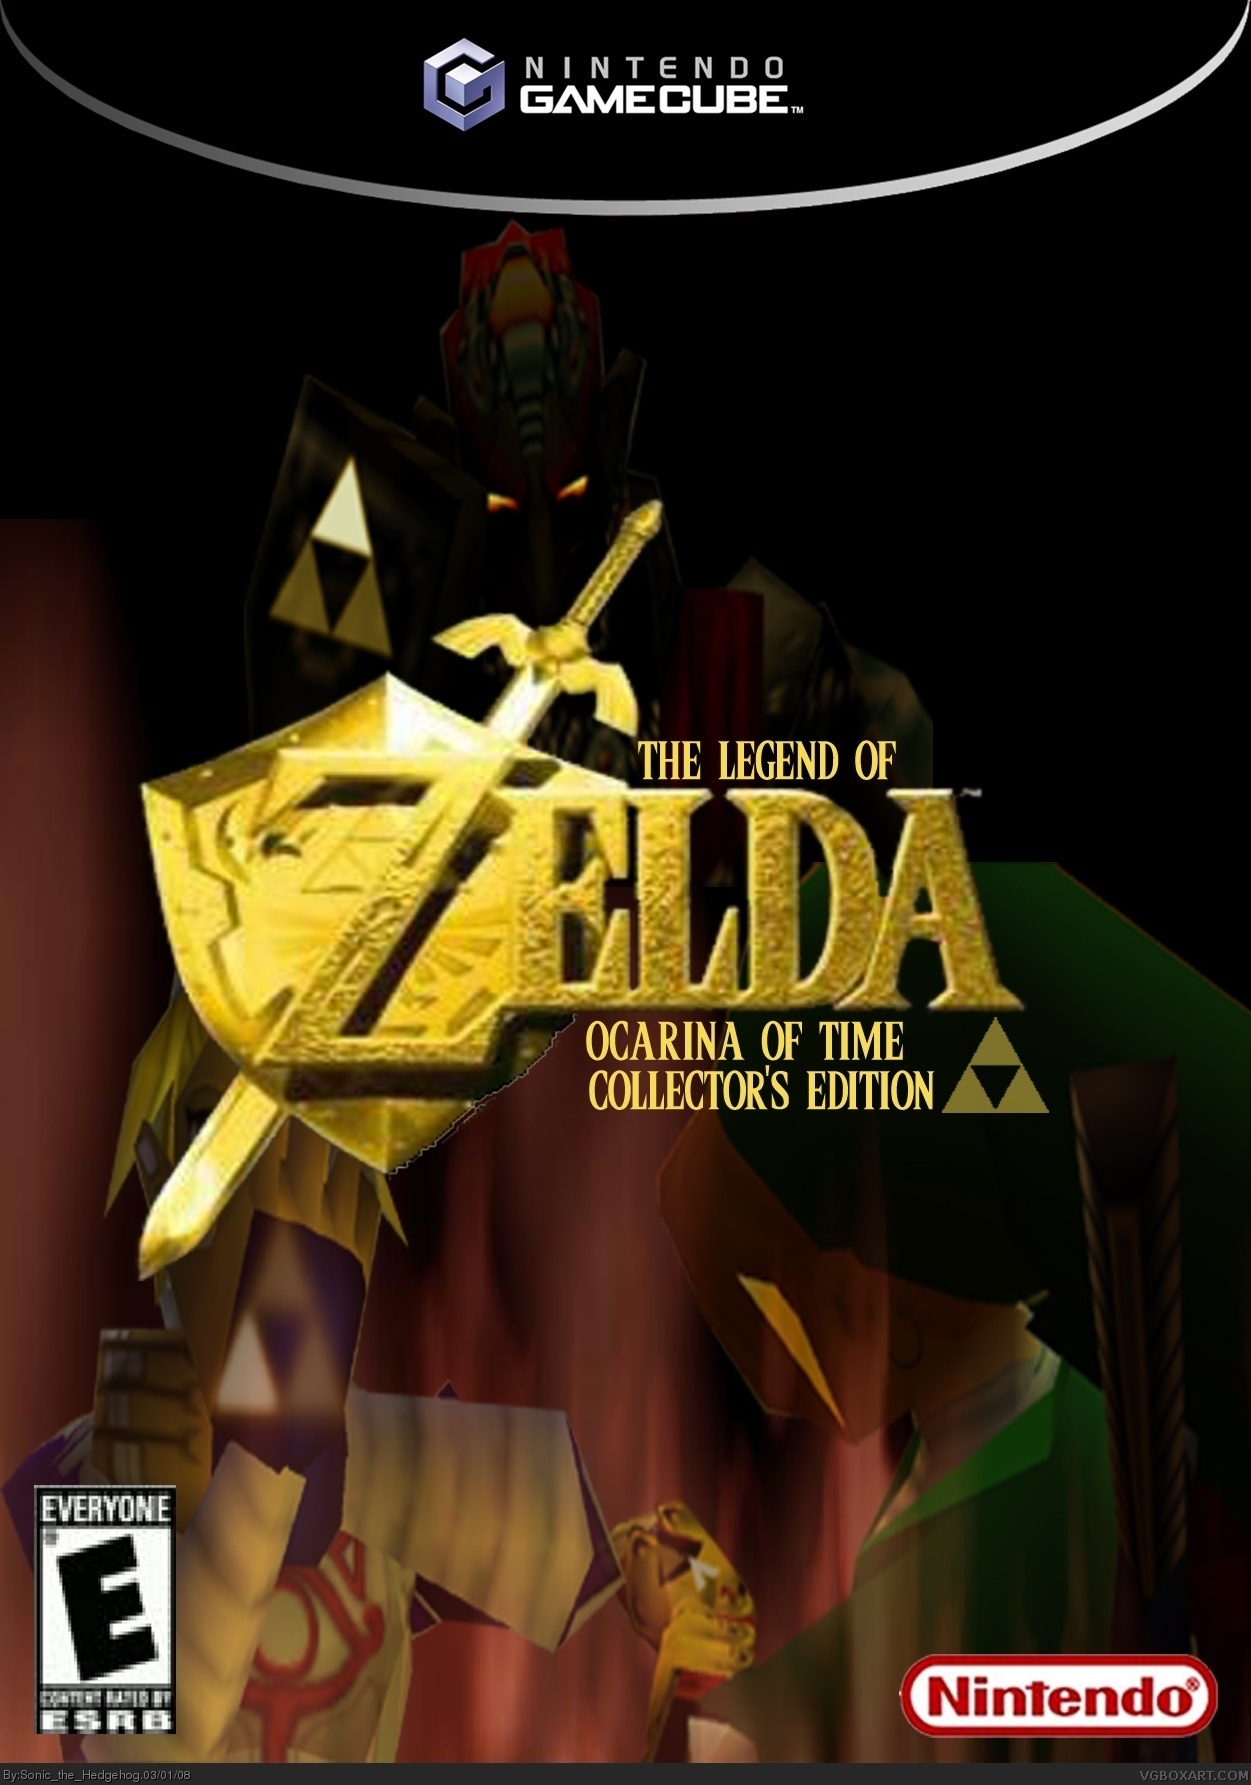 The Legend of Zelda: Ocarina of Time Collector's Edition box cover